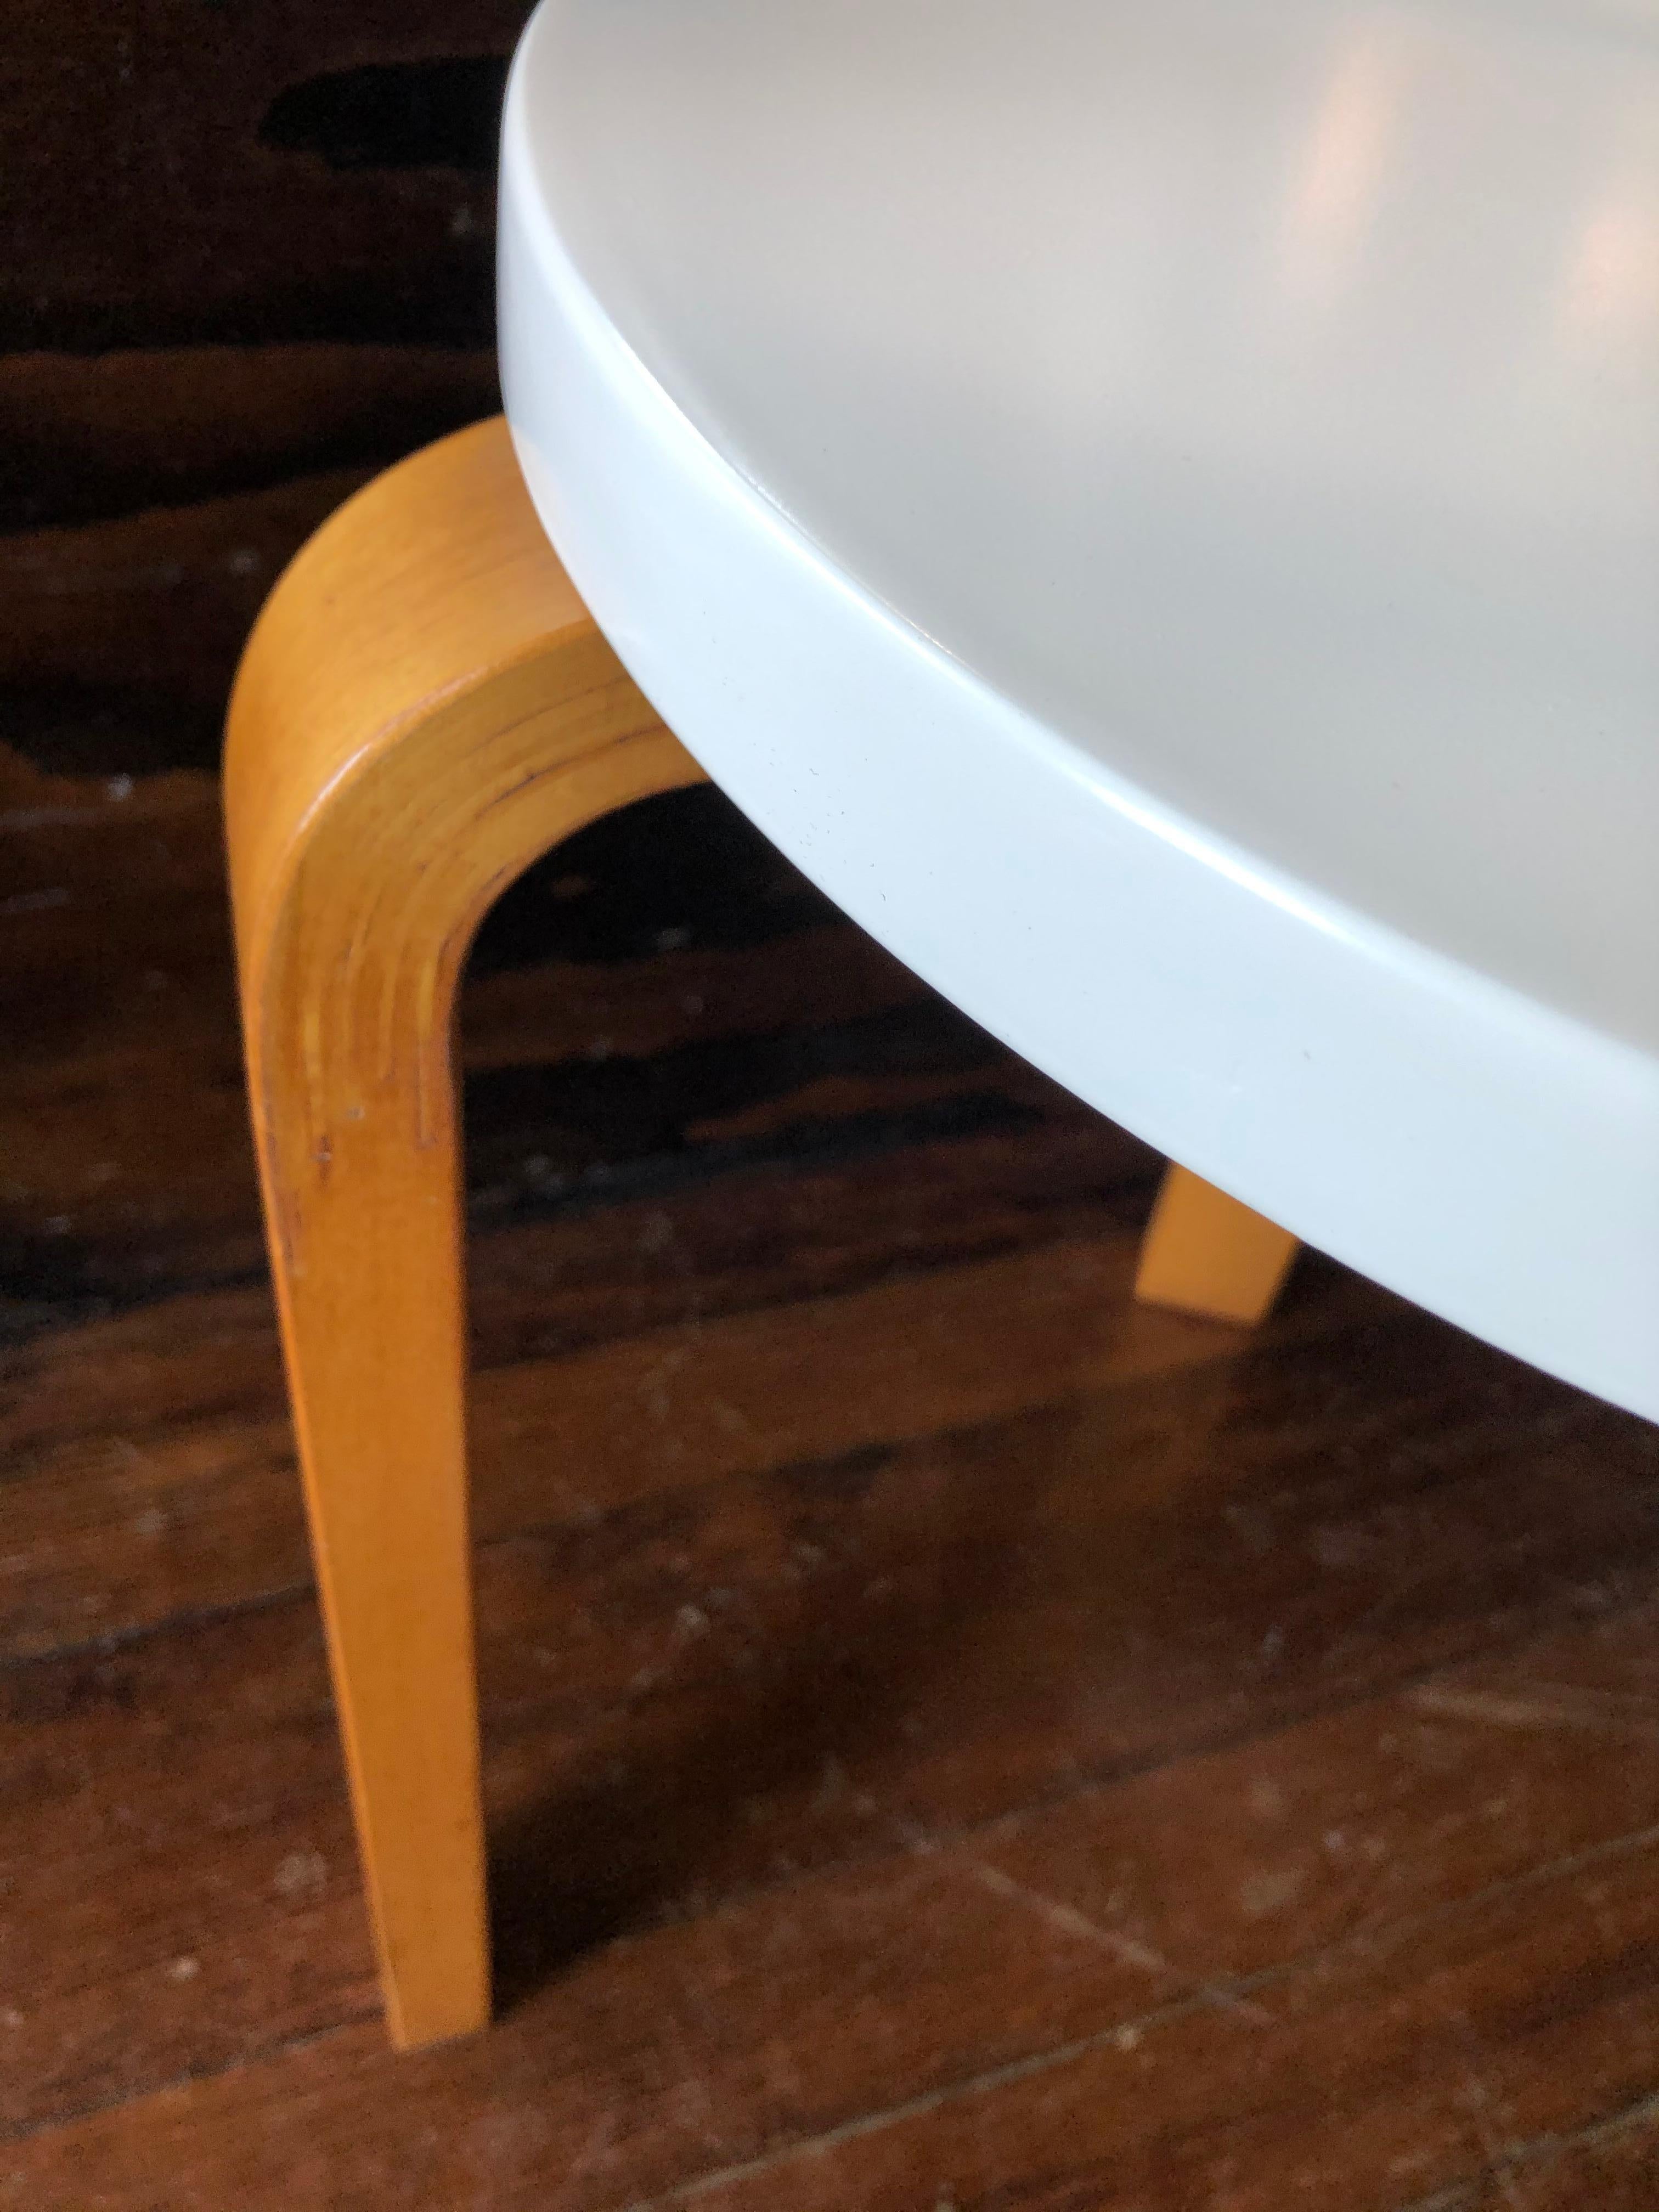 Alvar Aalto Early Finsven Stamped Stool / Small Table Lacquer Top 1